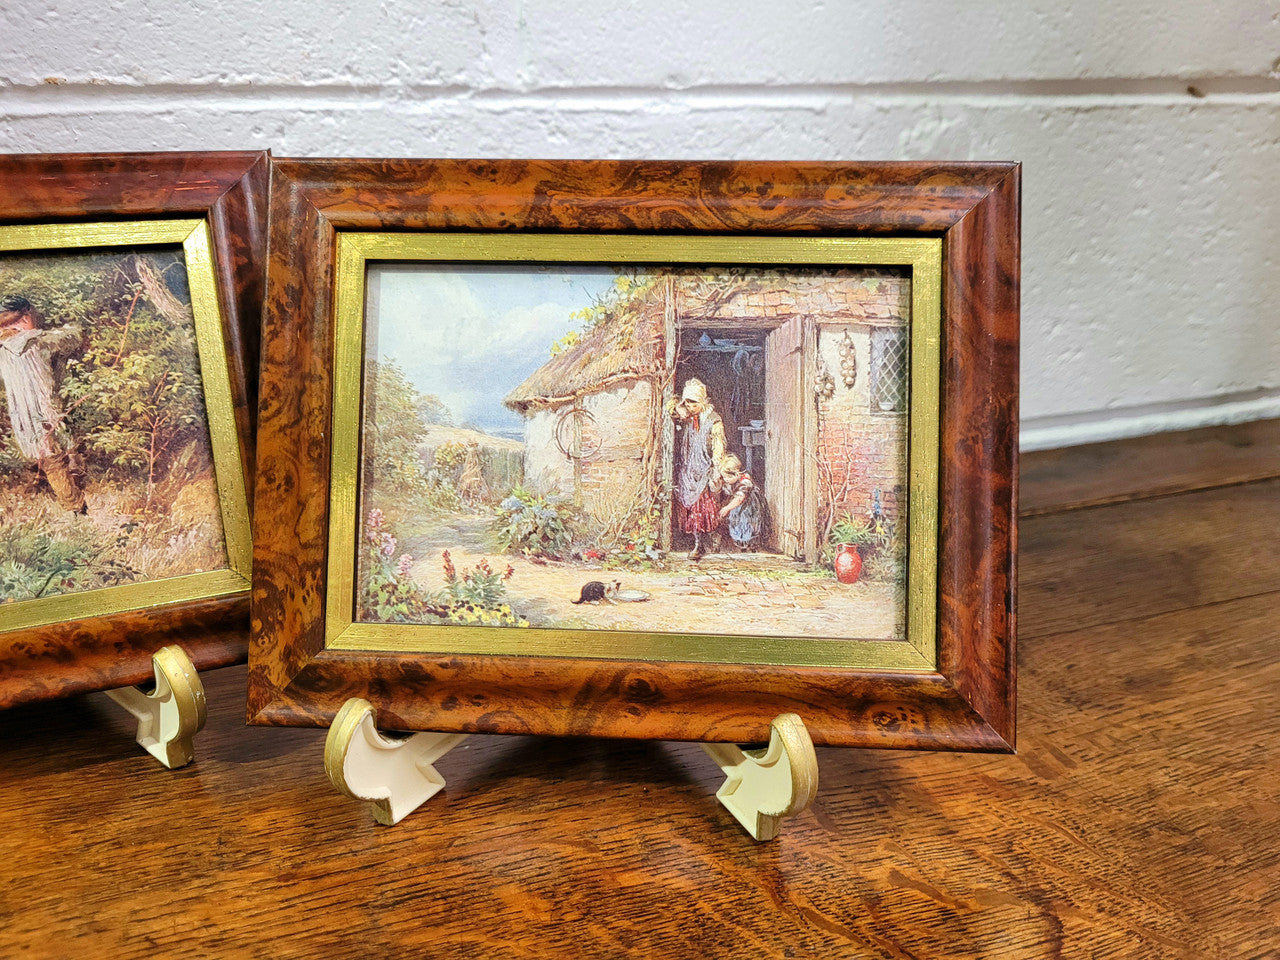 Delightful Myles Birket Foster framed prints, three different prints all nicely framed and in good original condition. Each print is being sold for $25 each